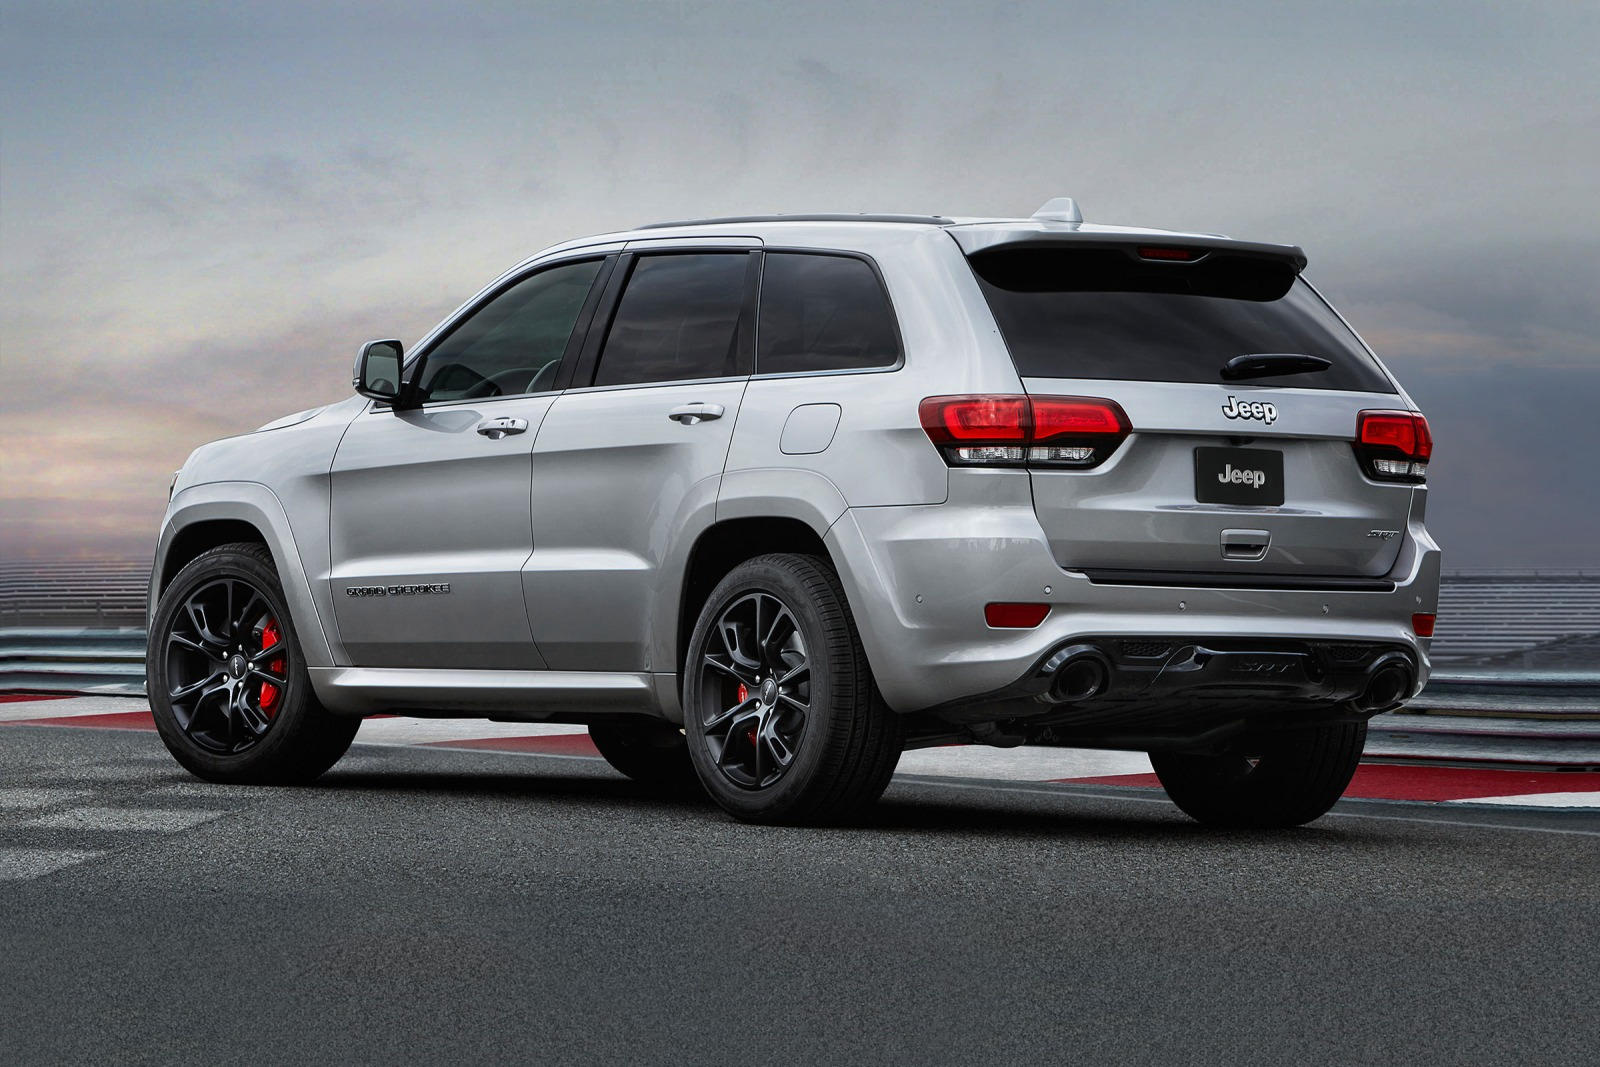 2019 Blacked Out Jeep Grand Cherokee